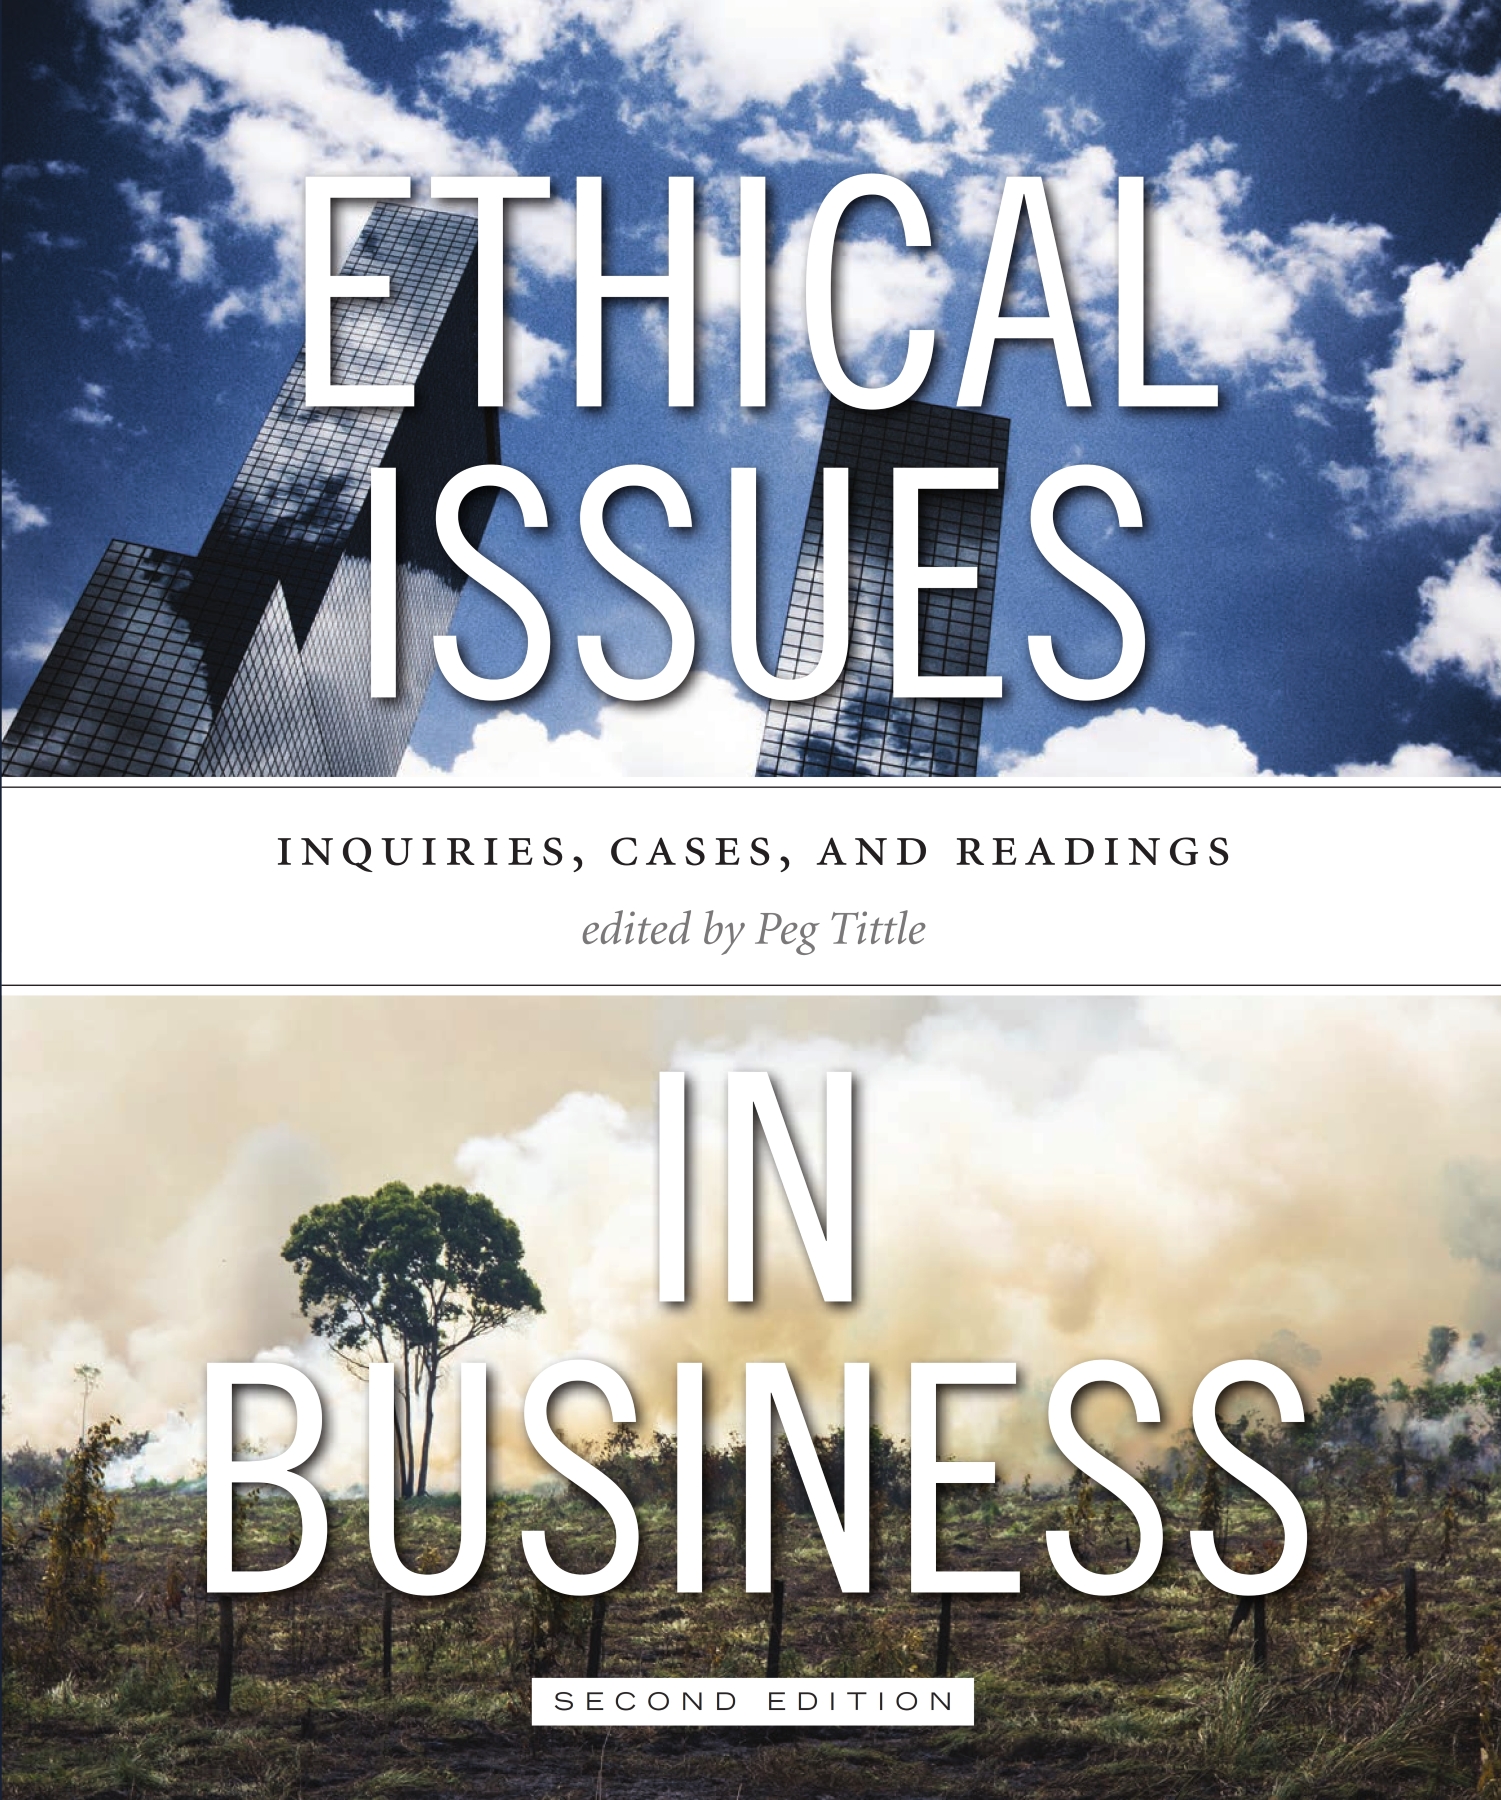 ethical issues in modern business management research paper